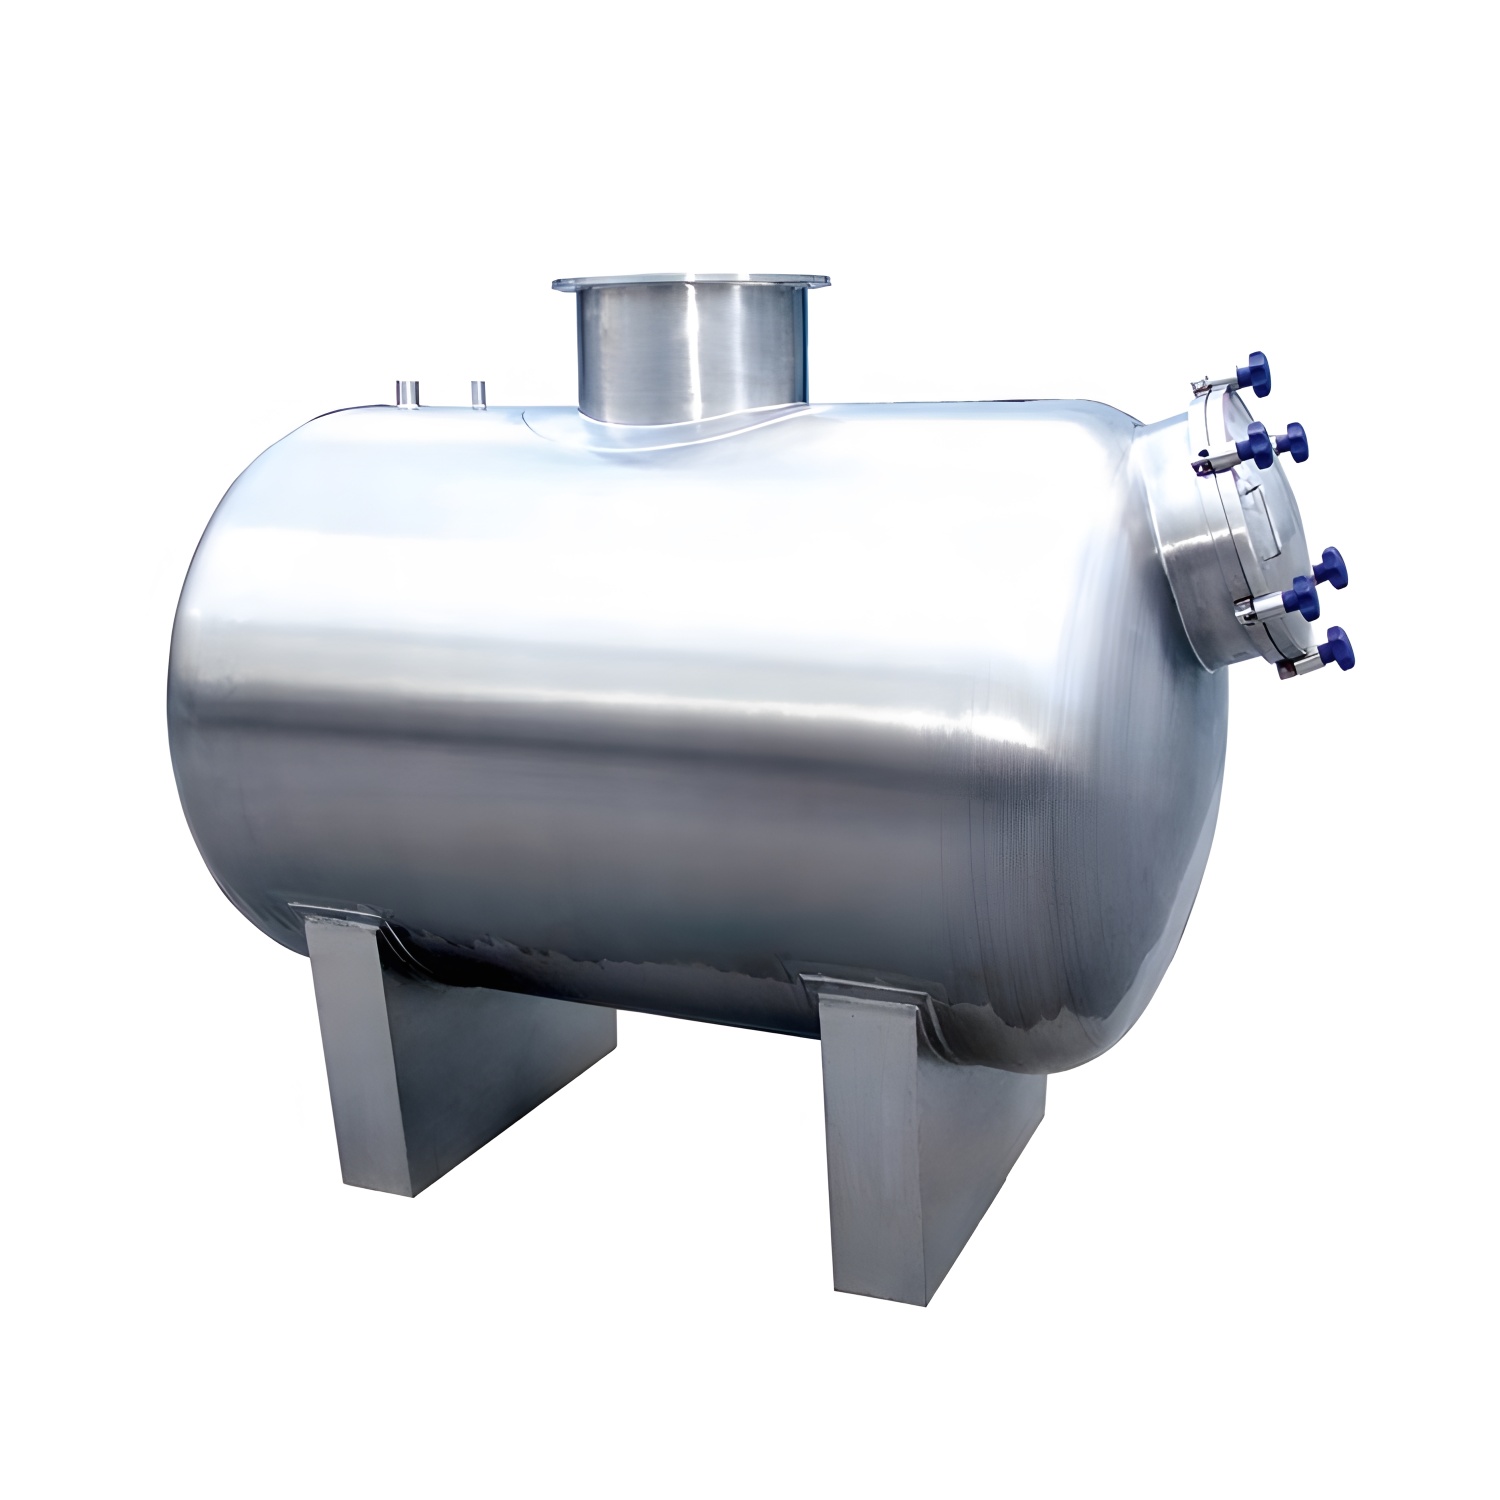 See Wholesale stainless steel mini water tank Listings For Your Business 